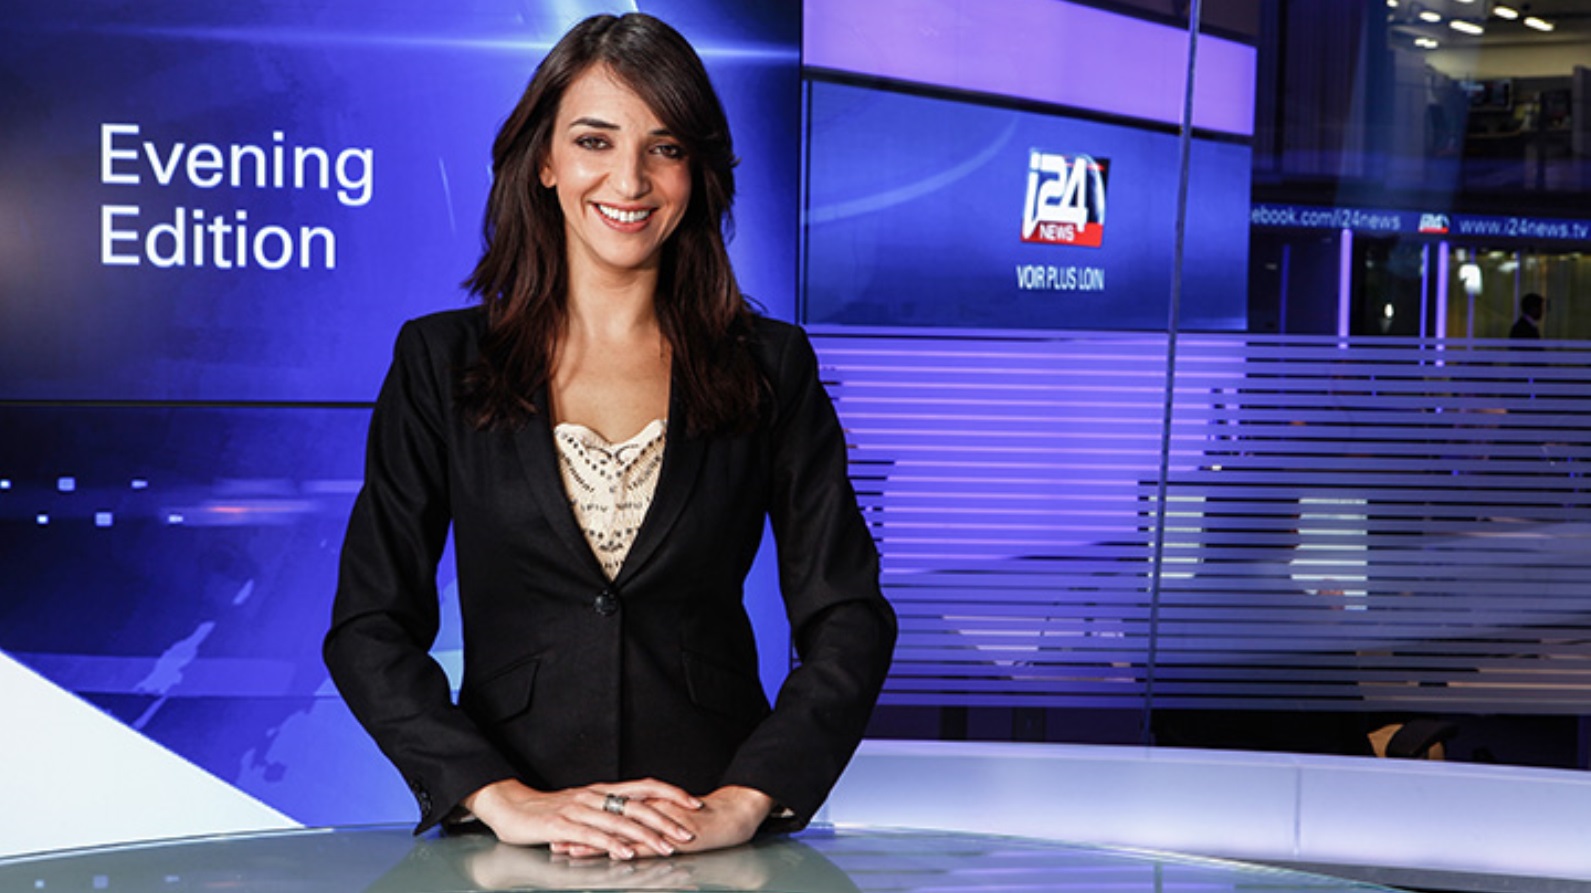 Lucy Aharish anchoring the news. Photo by Kfir Ziv Photography